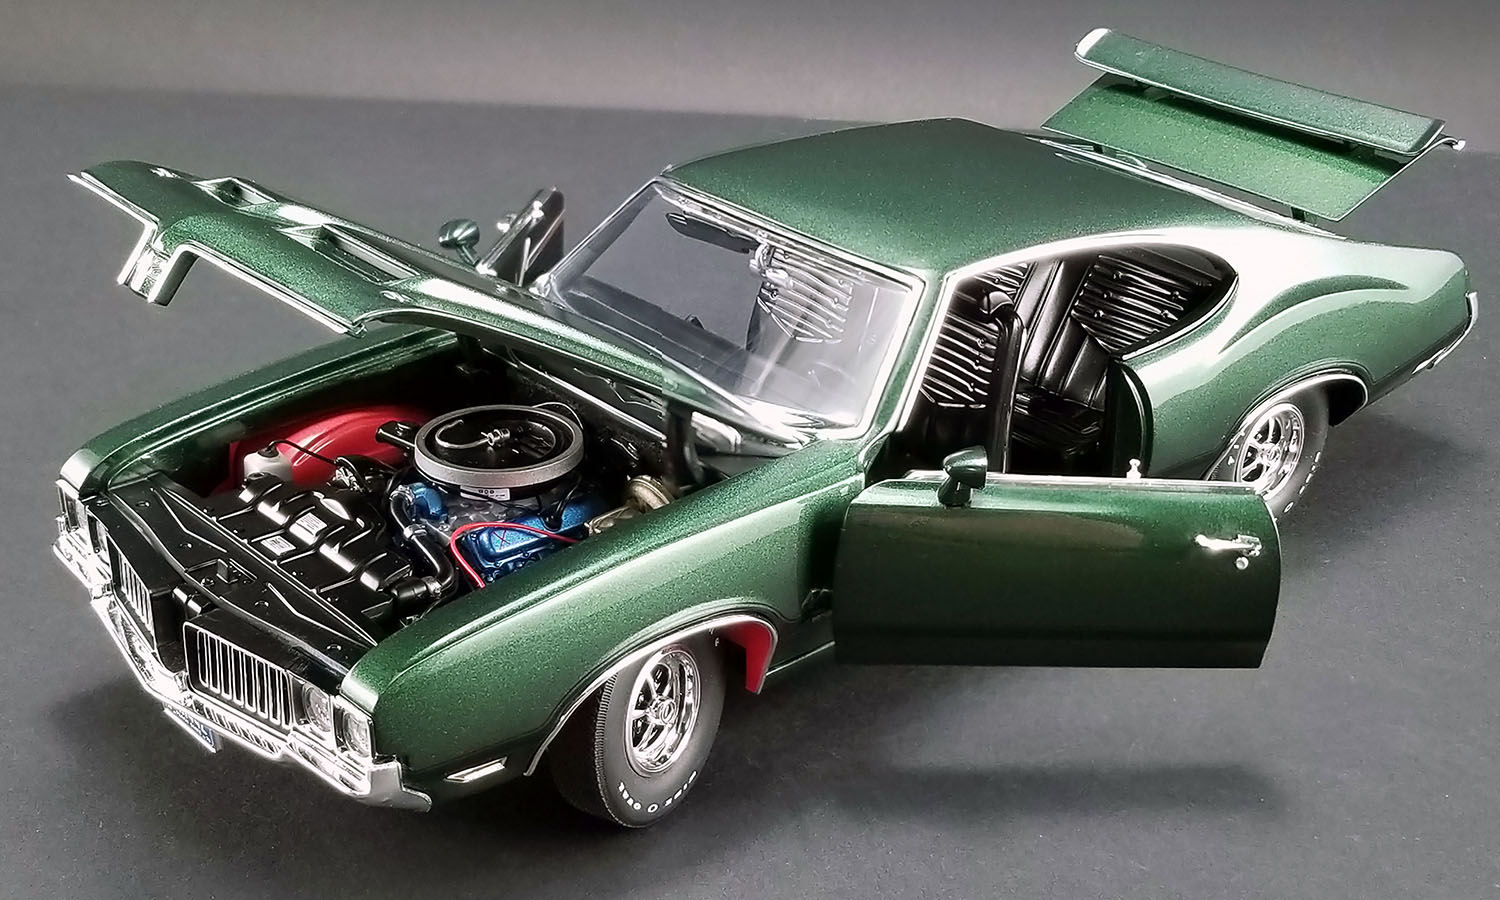 1970 OLDSMOBILE 442 W-30 GUYCAST 1:18 ACME REEF TURQUOISE ONLY 244 MADE GMP CAR